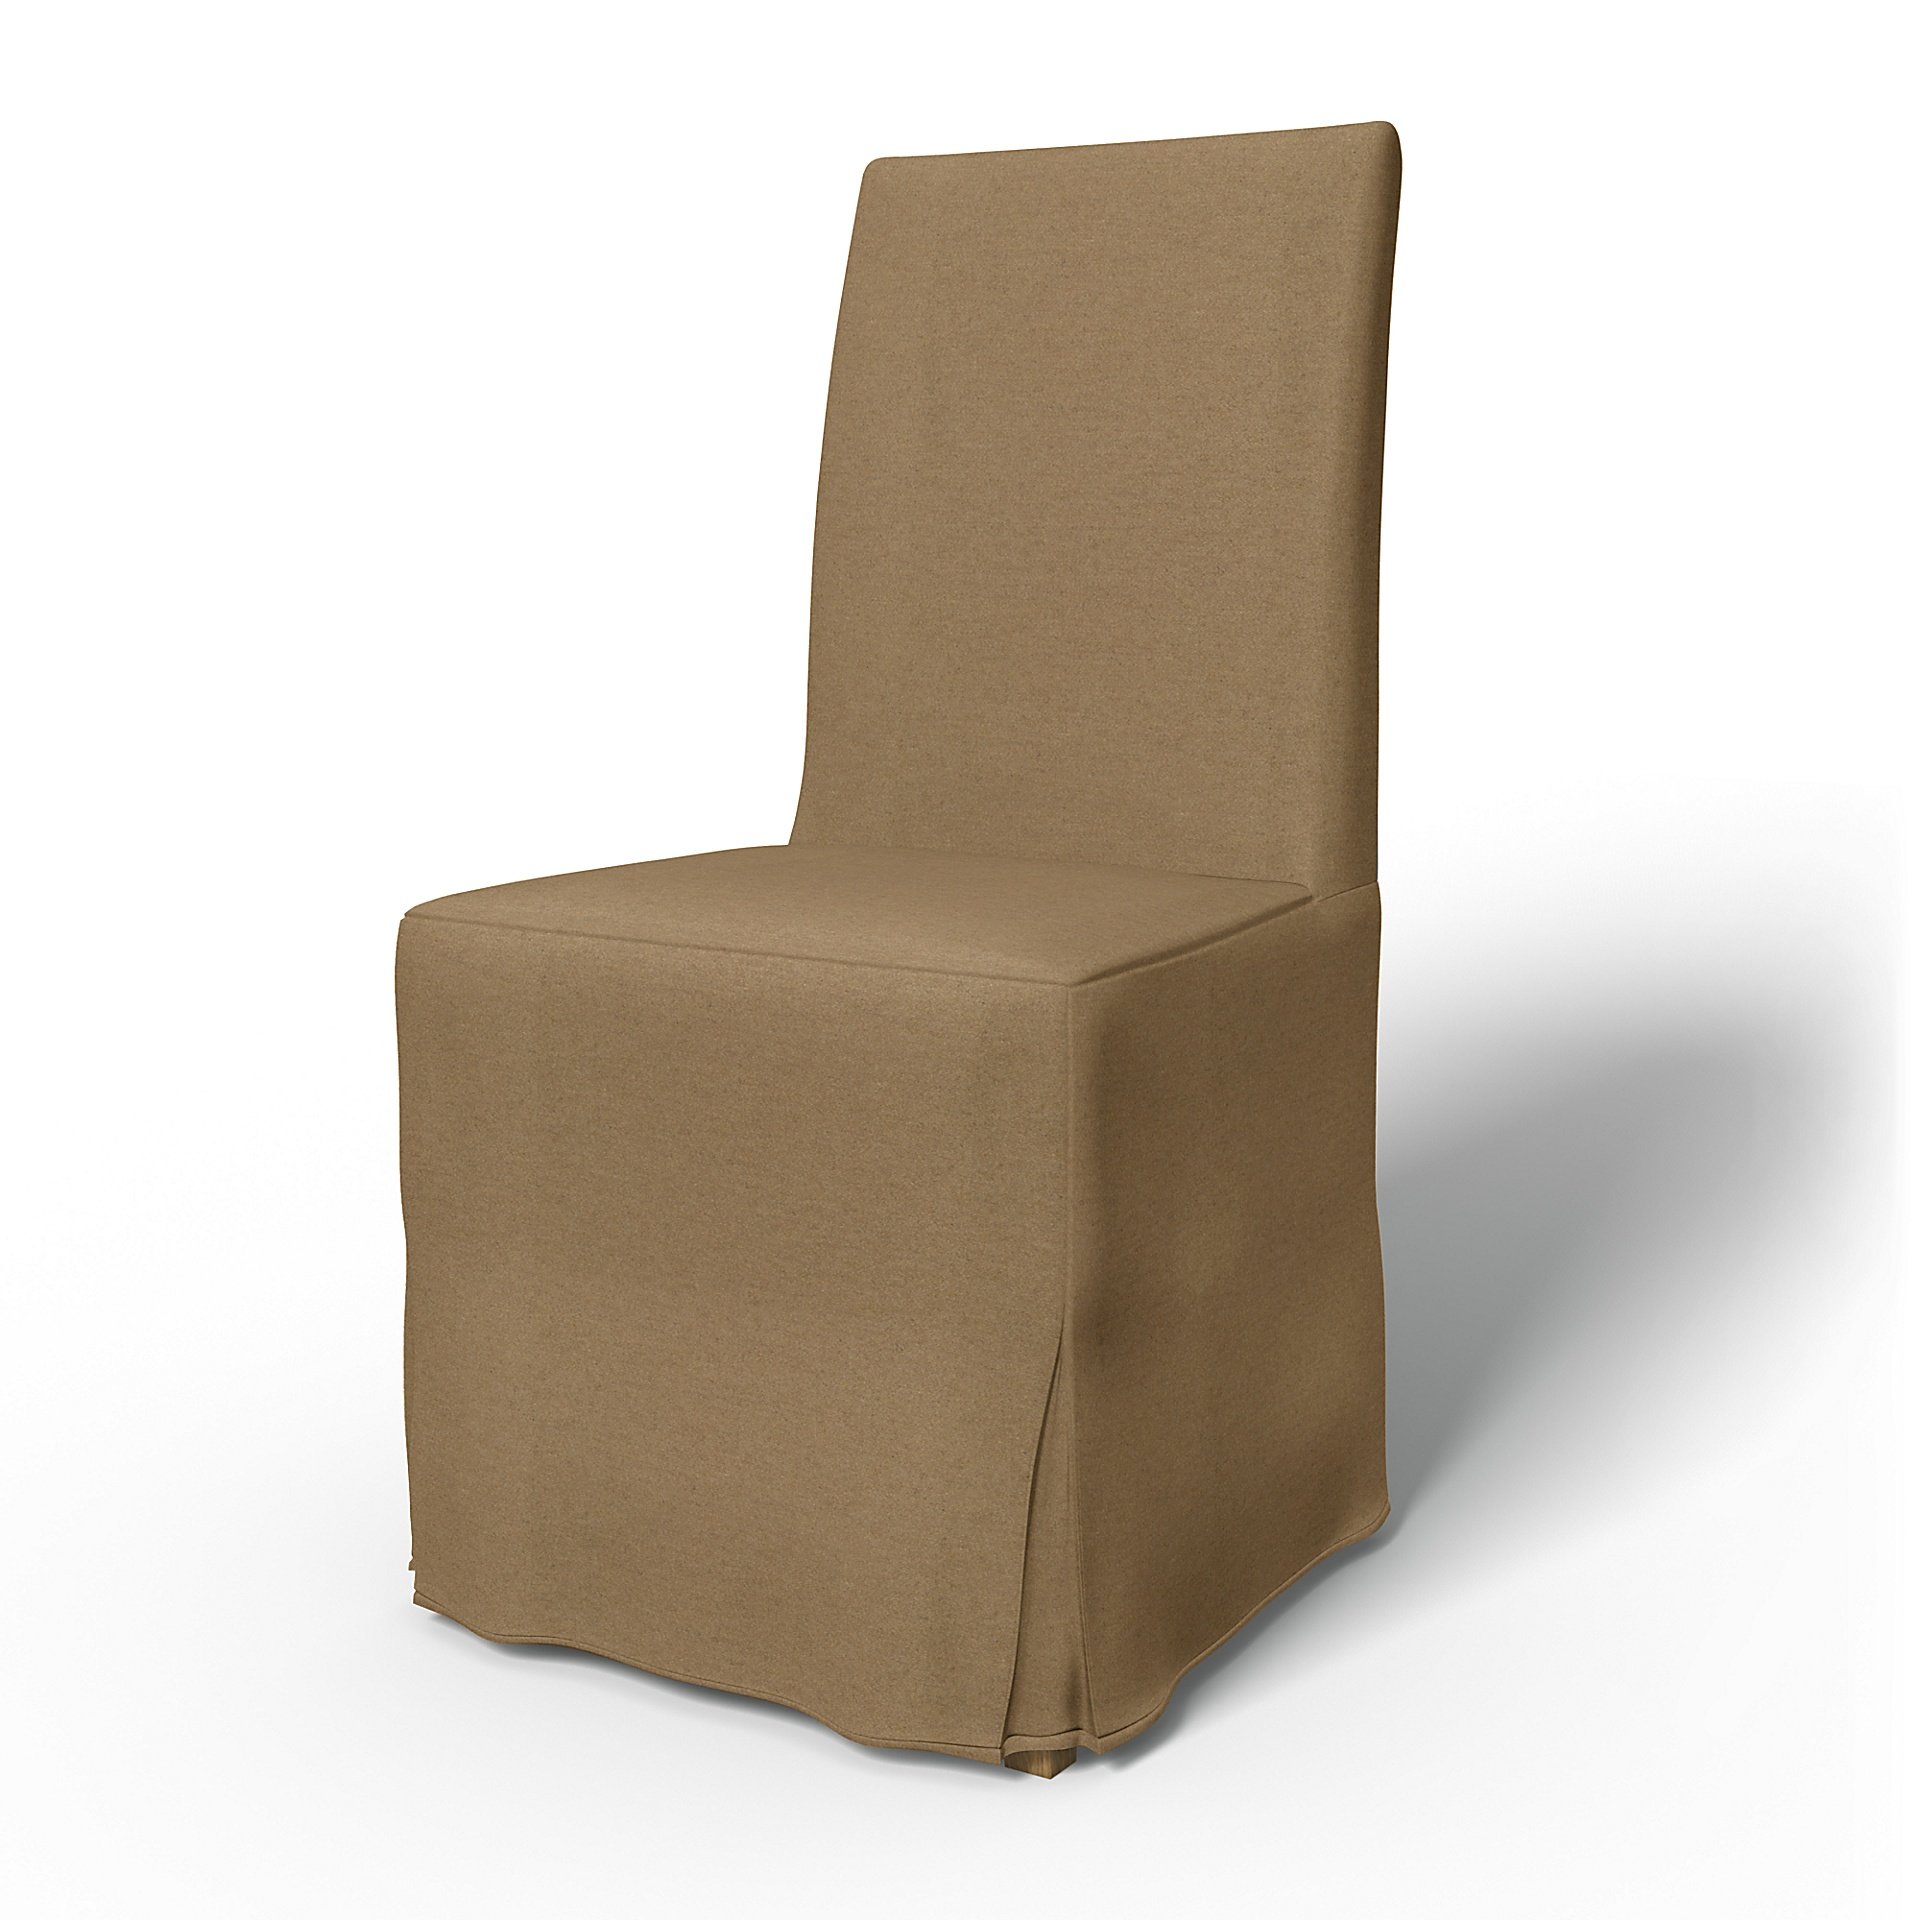 IKEA - Henriksdal Dining Chair Cover Long Skirt with Box Pleat (Standard model), Sand, Wool - Bemz